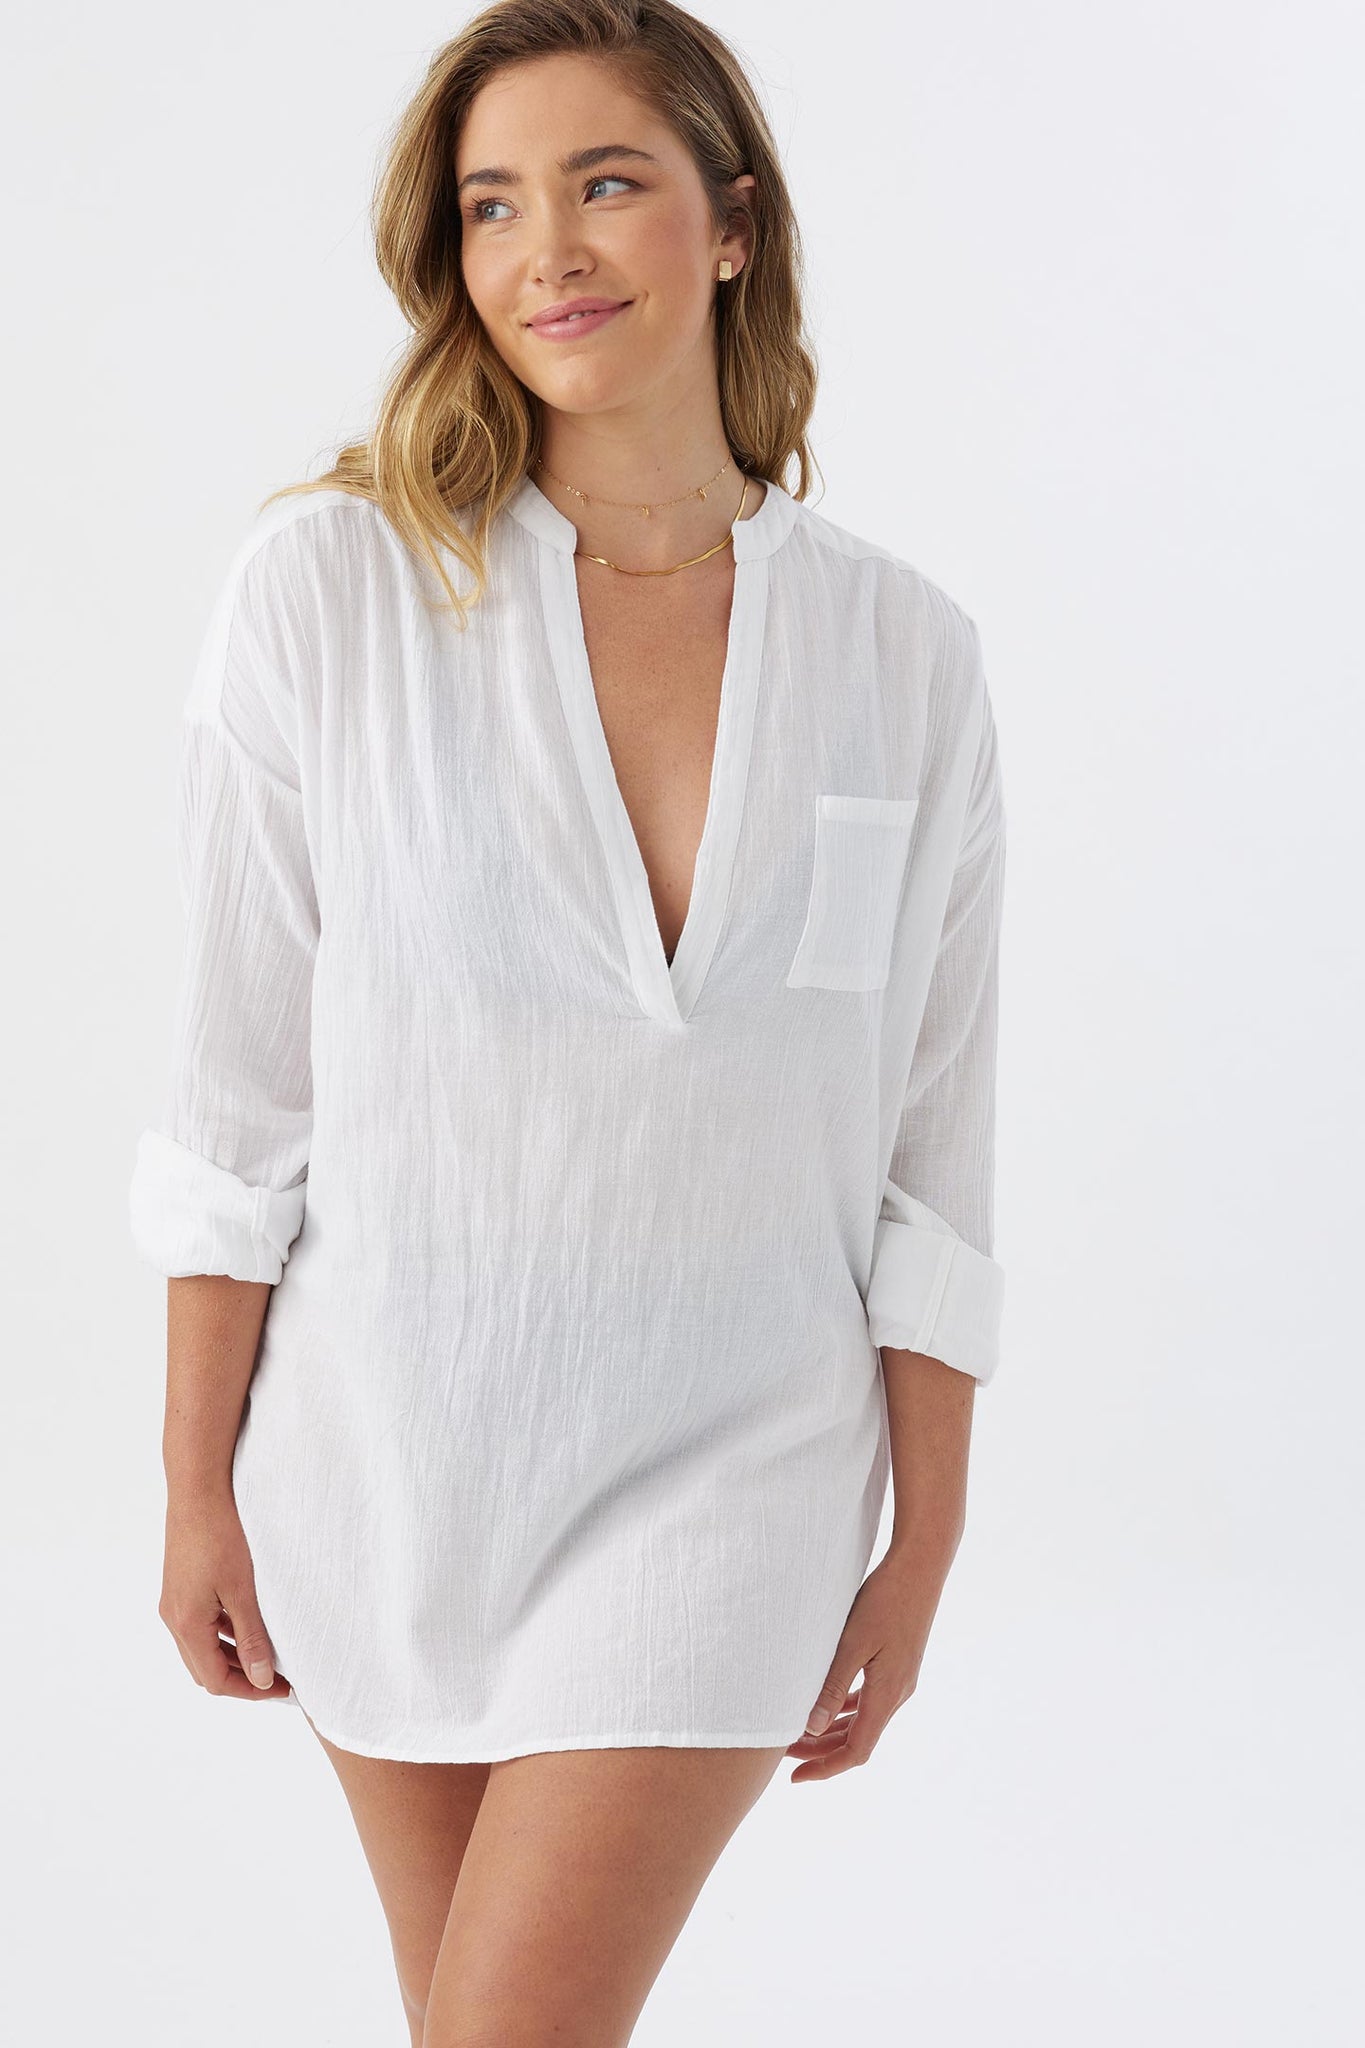 SALTWATER SOLIDS BELIZIN COVER-UP TUNIC